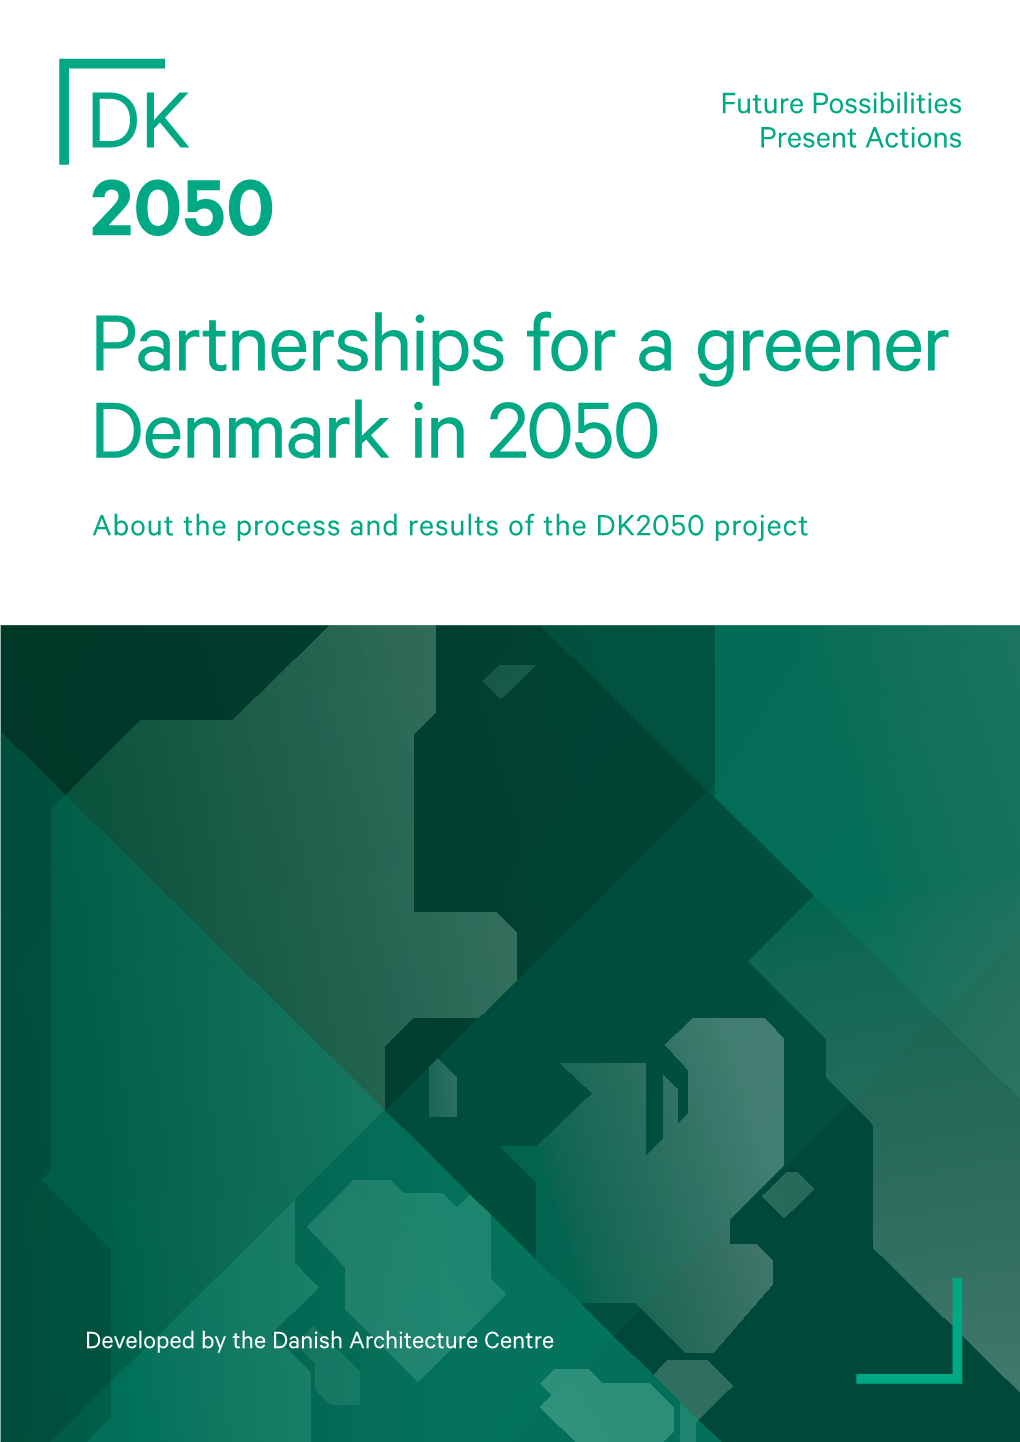 Partnerships for a Greener Denmark in 2050 About the Process and Results of the DK2050 Project